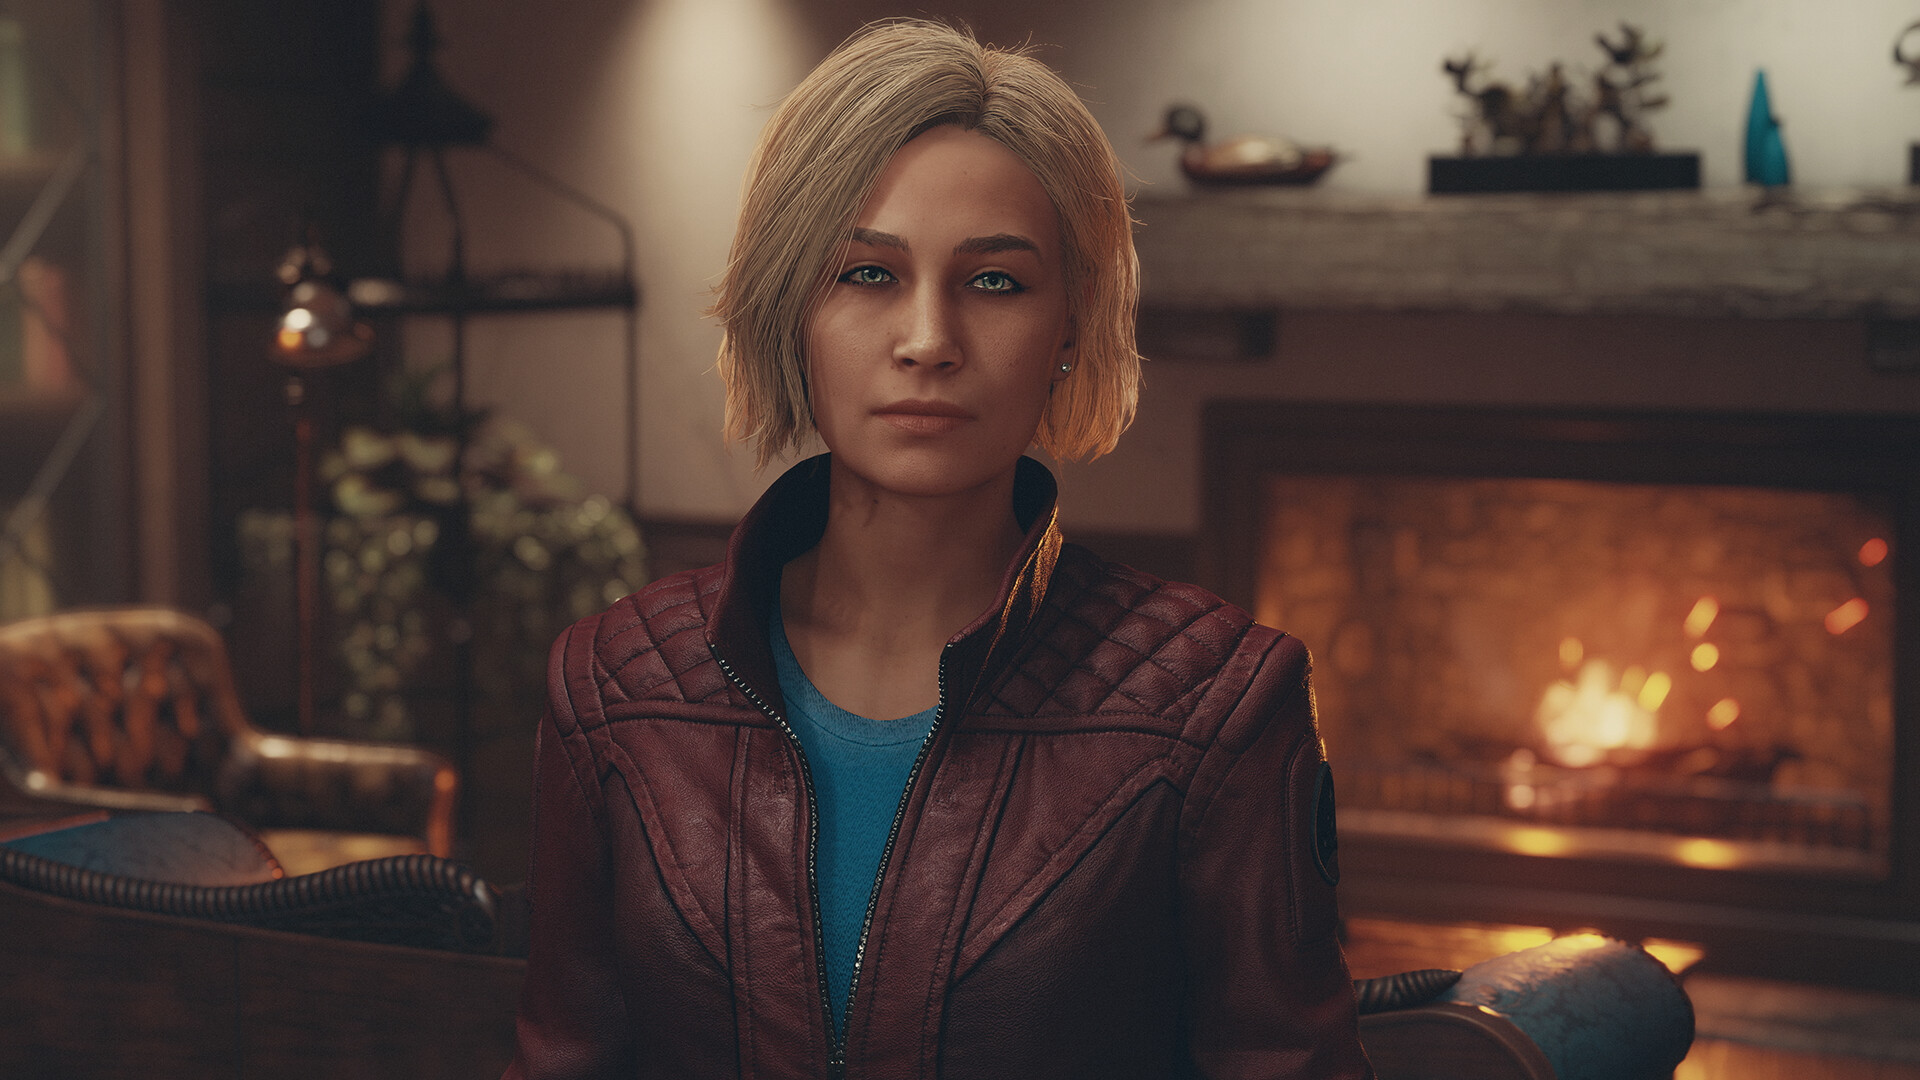 Starfield has me bored already: A woman with blond hair and a leather jacket, Sarah Morgan from Bethesda RPG game Starfield